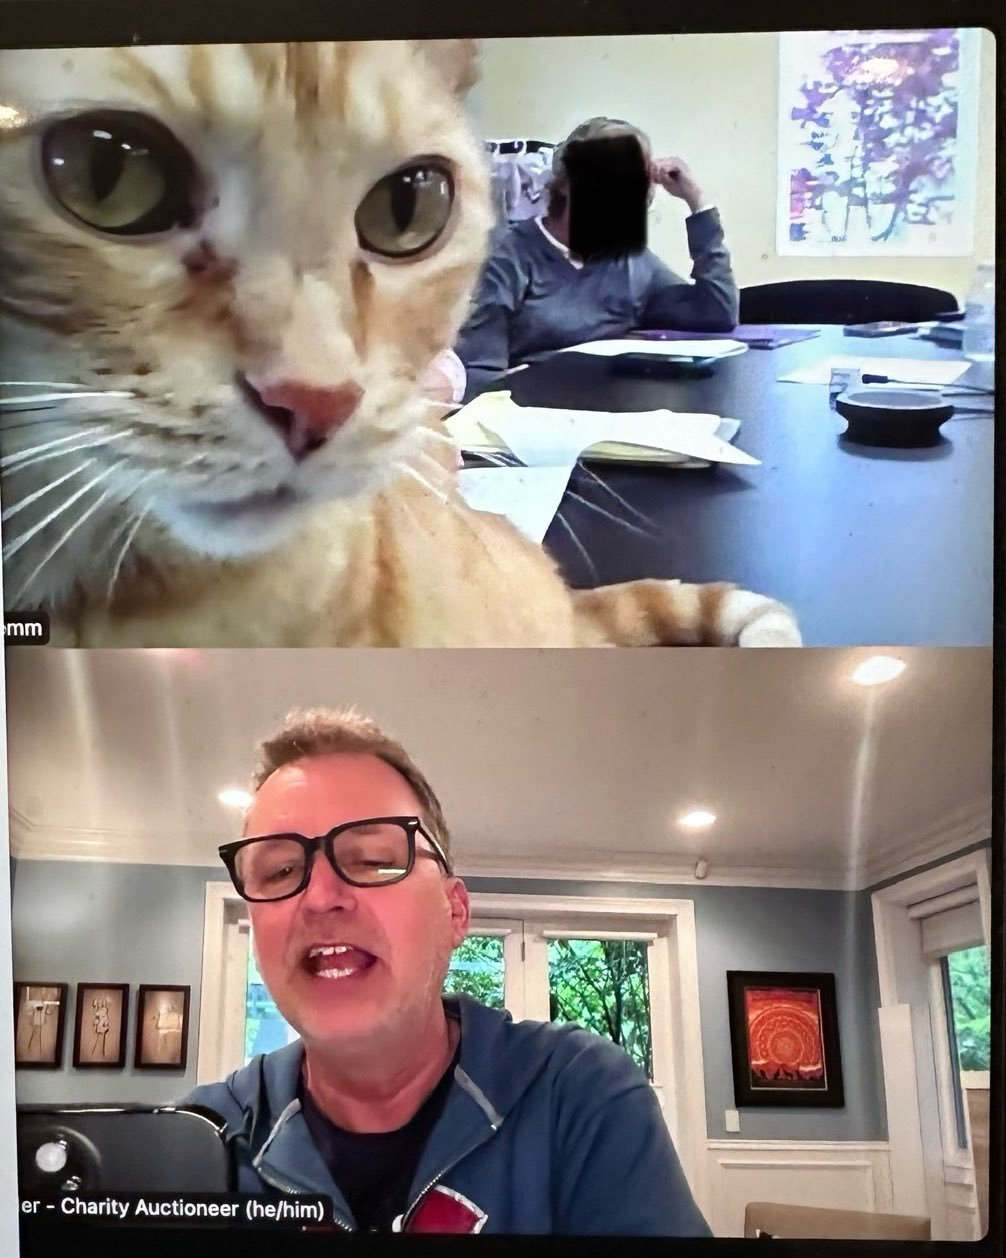 Best Zoom Mtg of the week. 🐱#CharityAuctions #HumaneSociety #CuriousCat